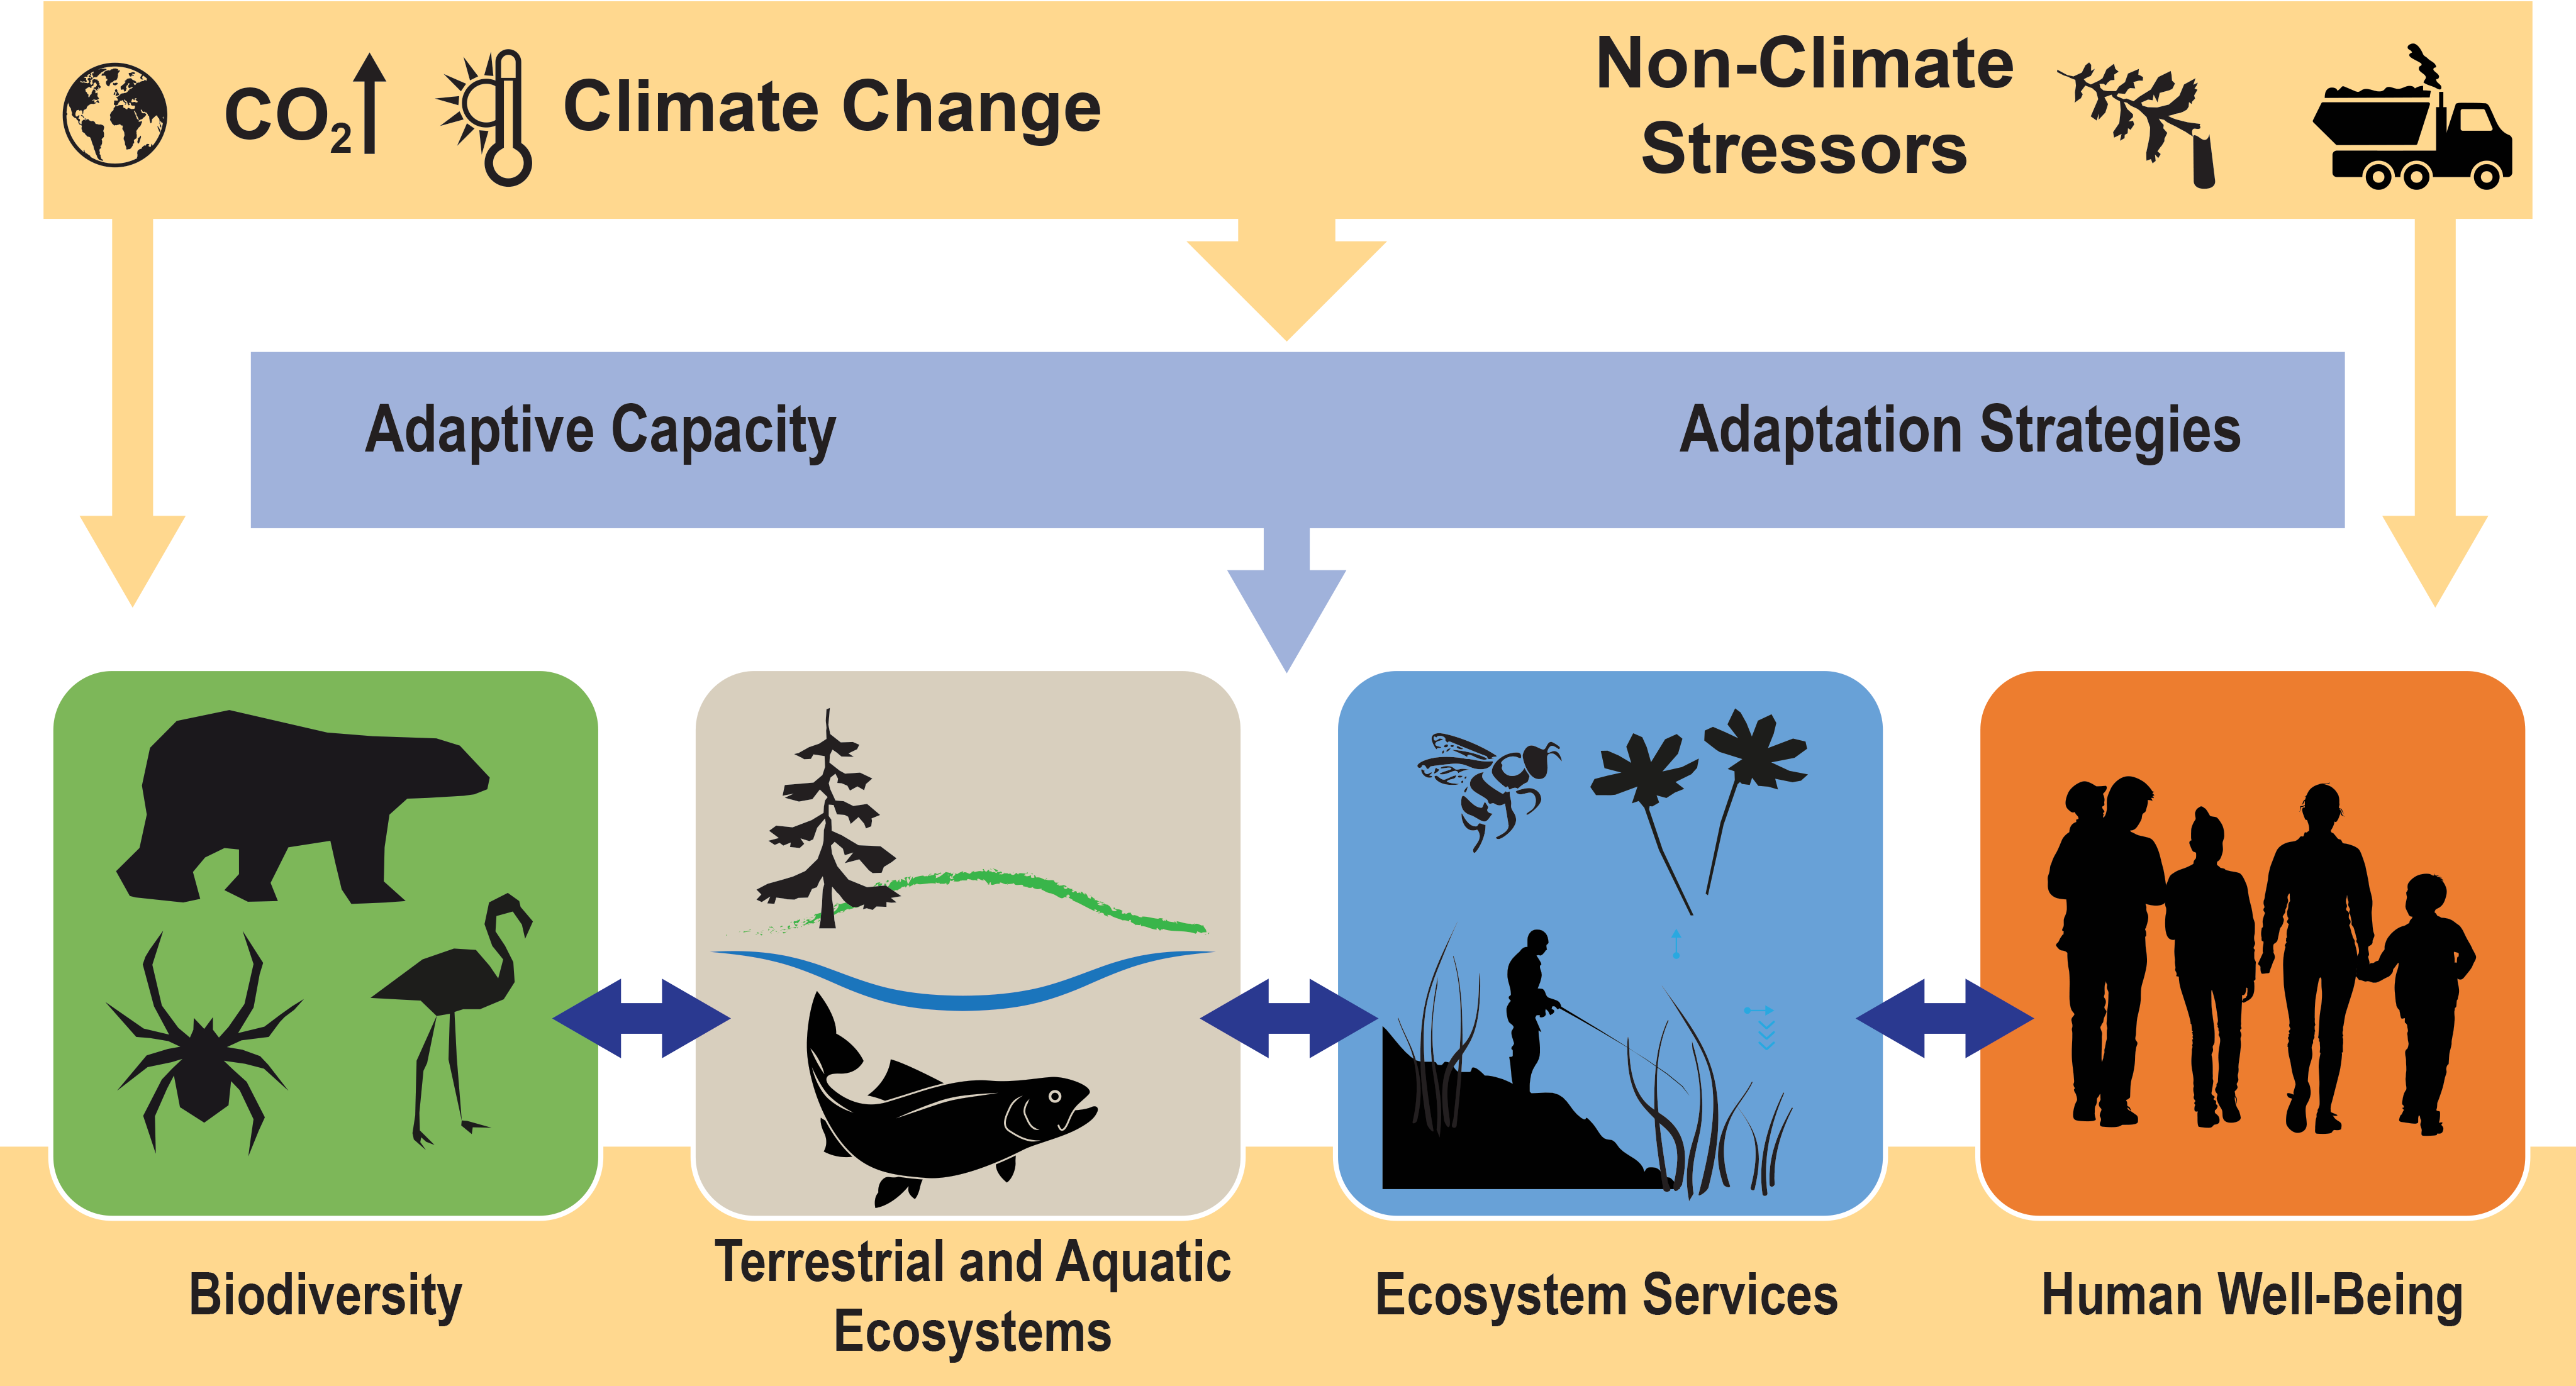 Climate Change, Ecosystems, and Ecosystem Services